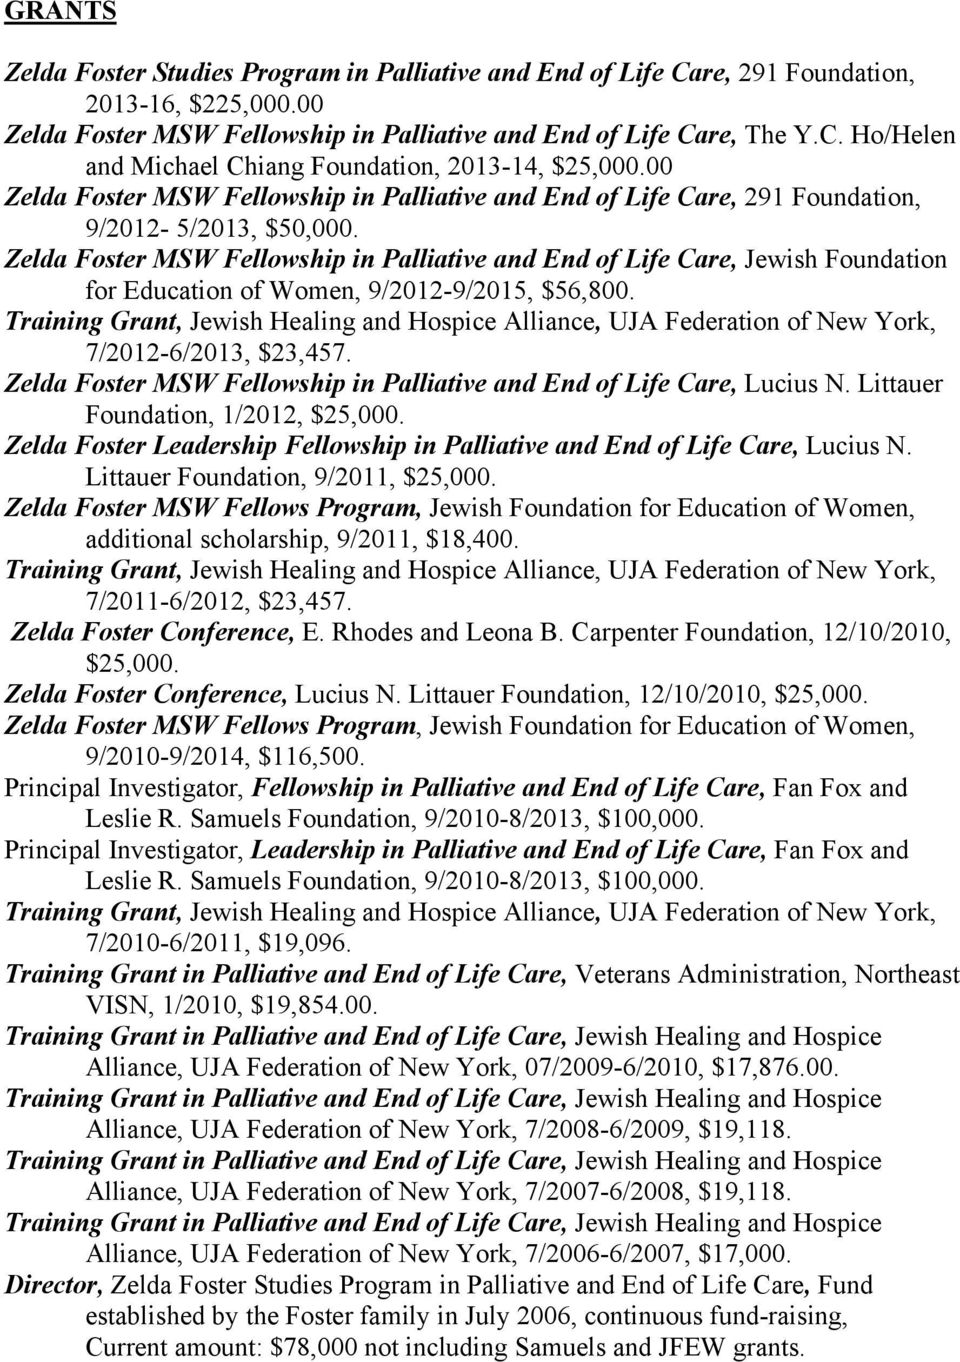 Zelda Foster MSW Fellowship in Palliative and End of Life Care, Jewish Foundation for Education of Women, 9/2012-9/2015, $56,800.